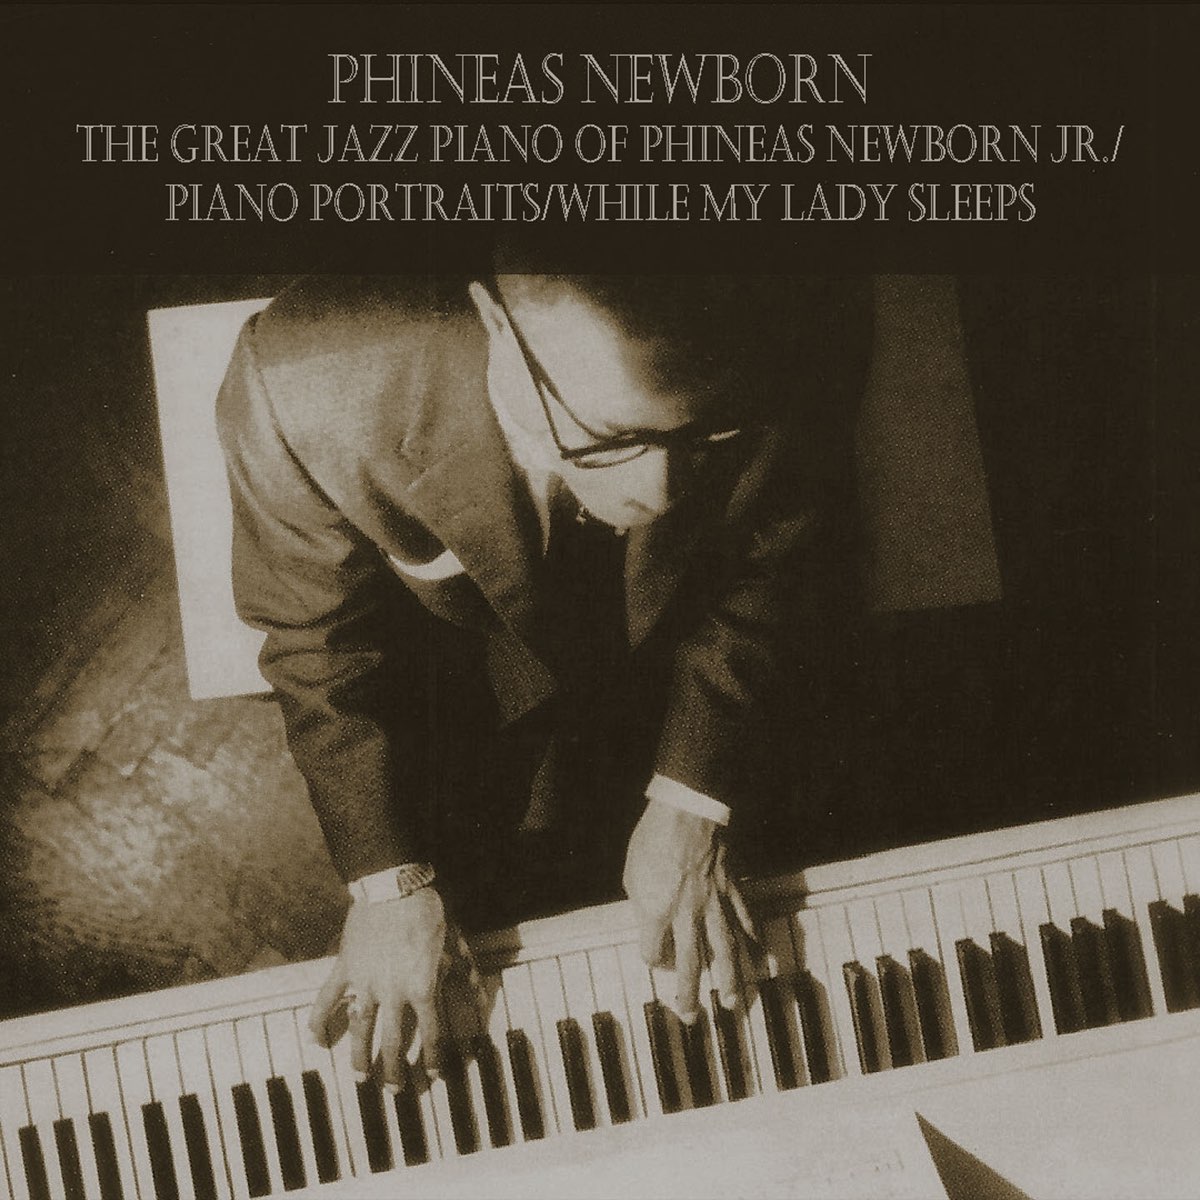 The Great Jazz Piano of Phineas Newborn Jr. / Piano Portraits / While My  Lady Sleeps de Phineas Newborn en Apple Music